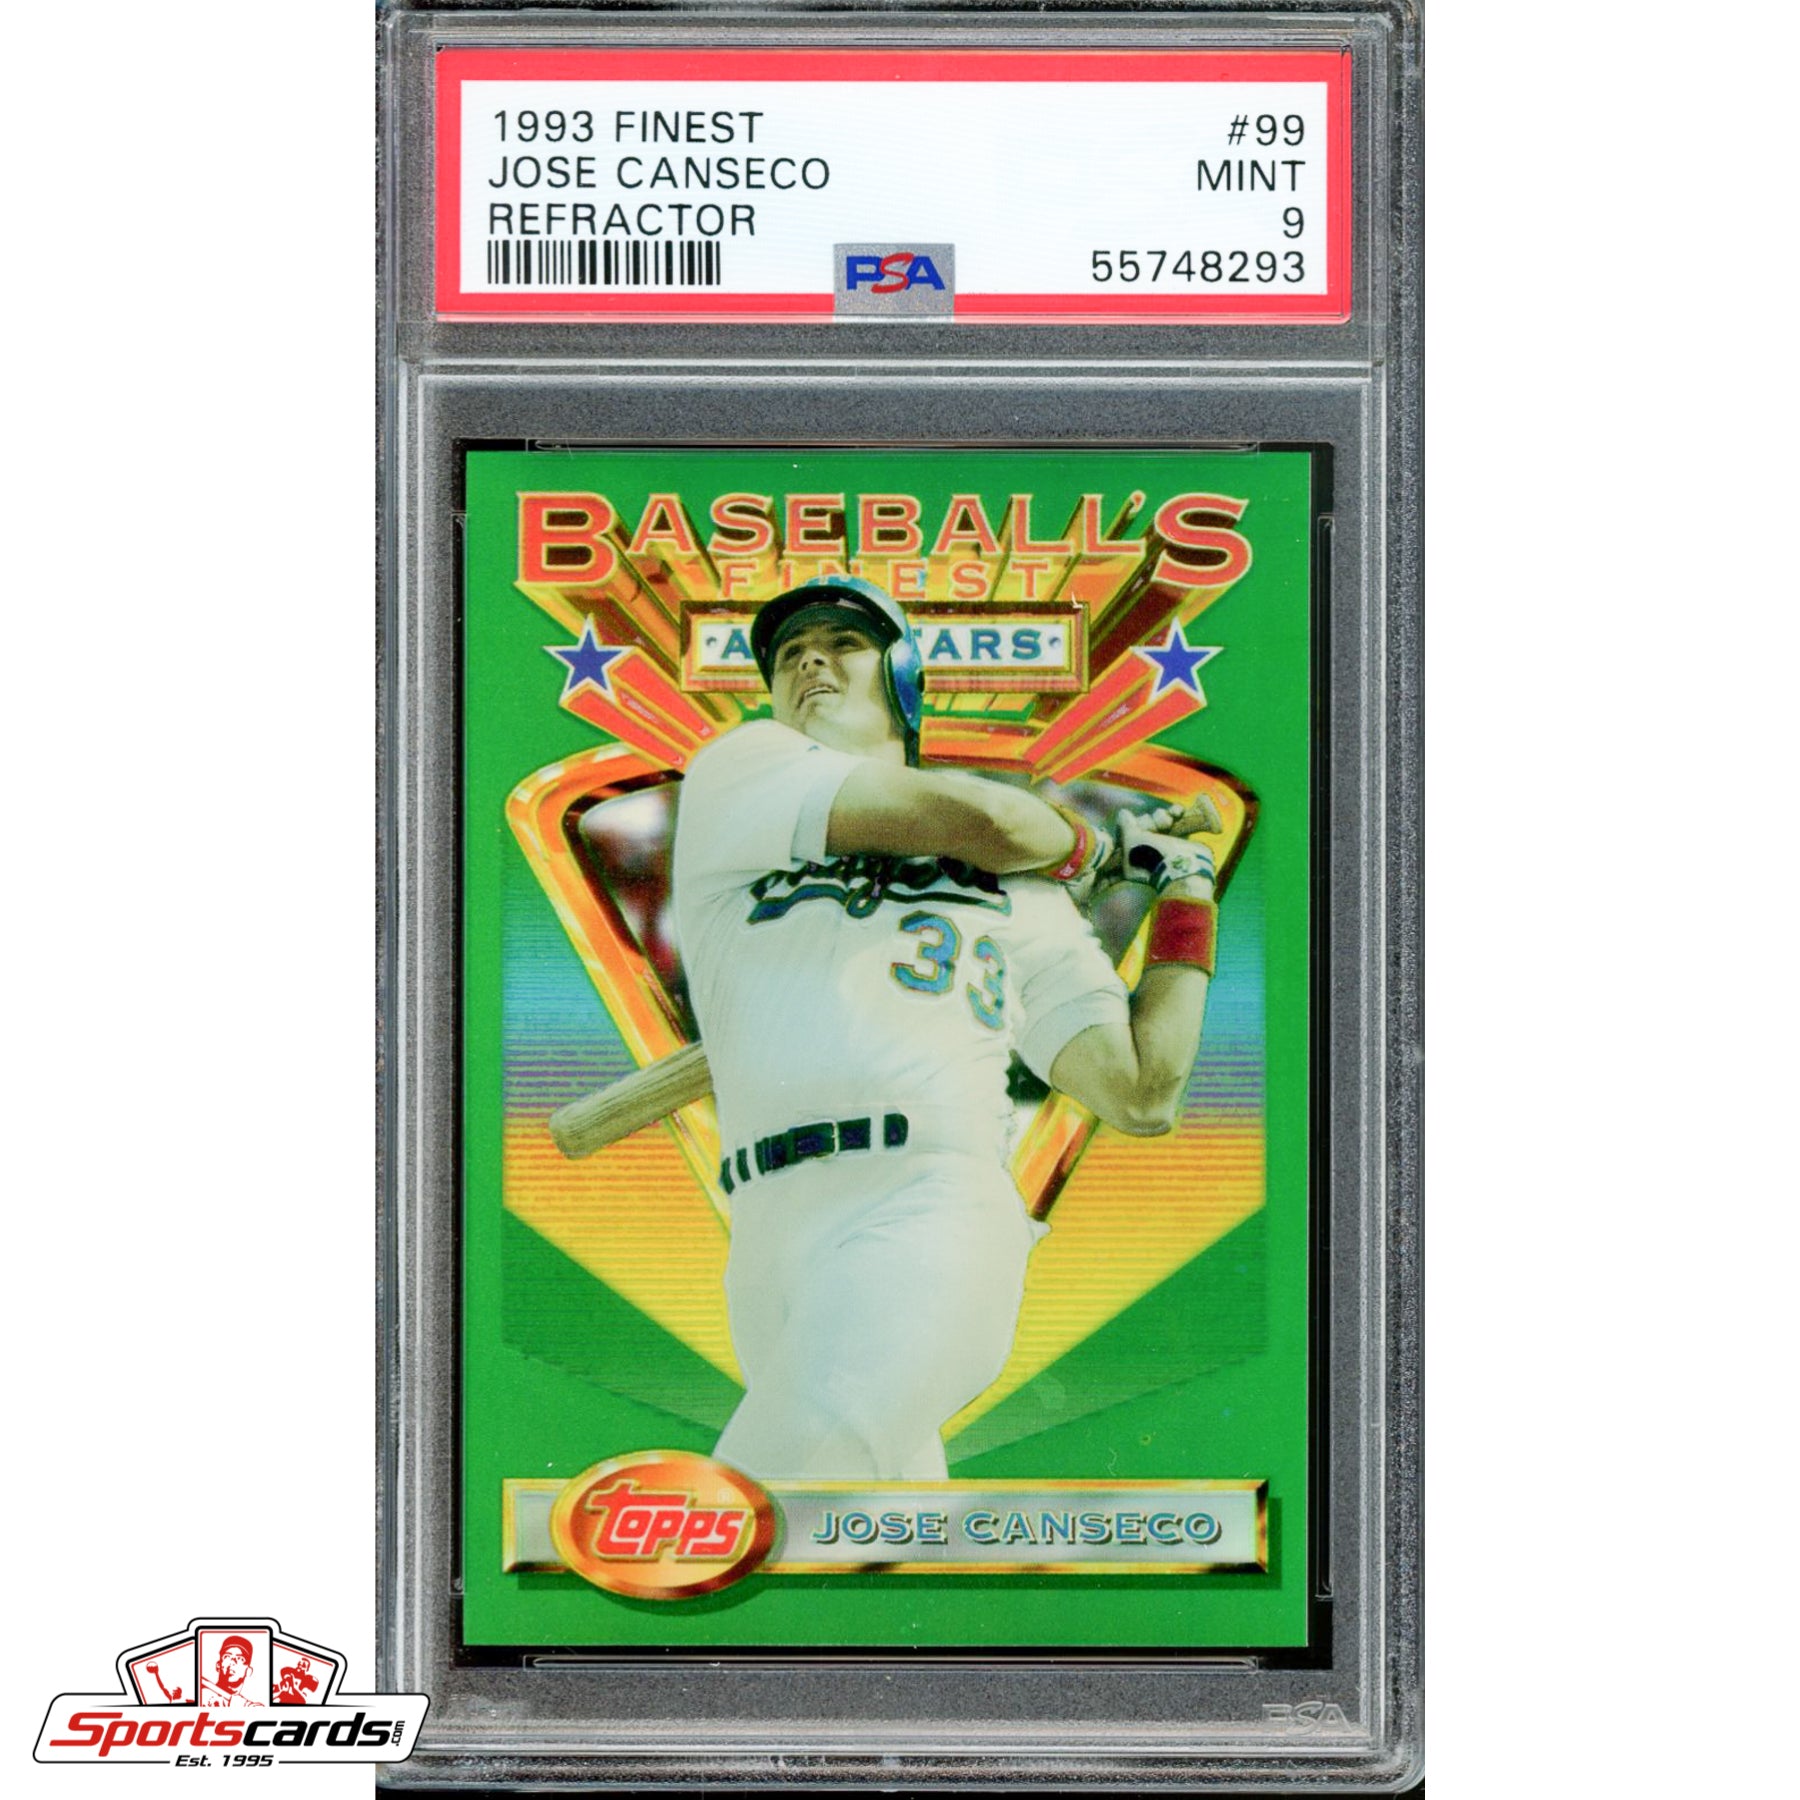 1993 Finest Jose Canseco Refractor #99 PSA 9